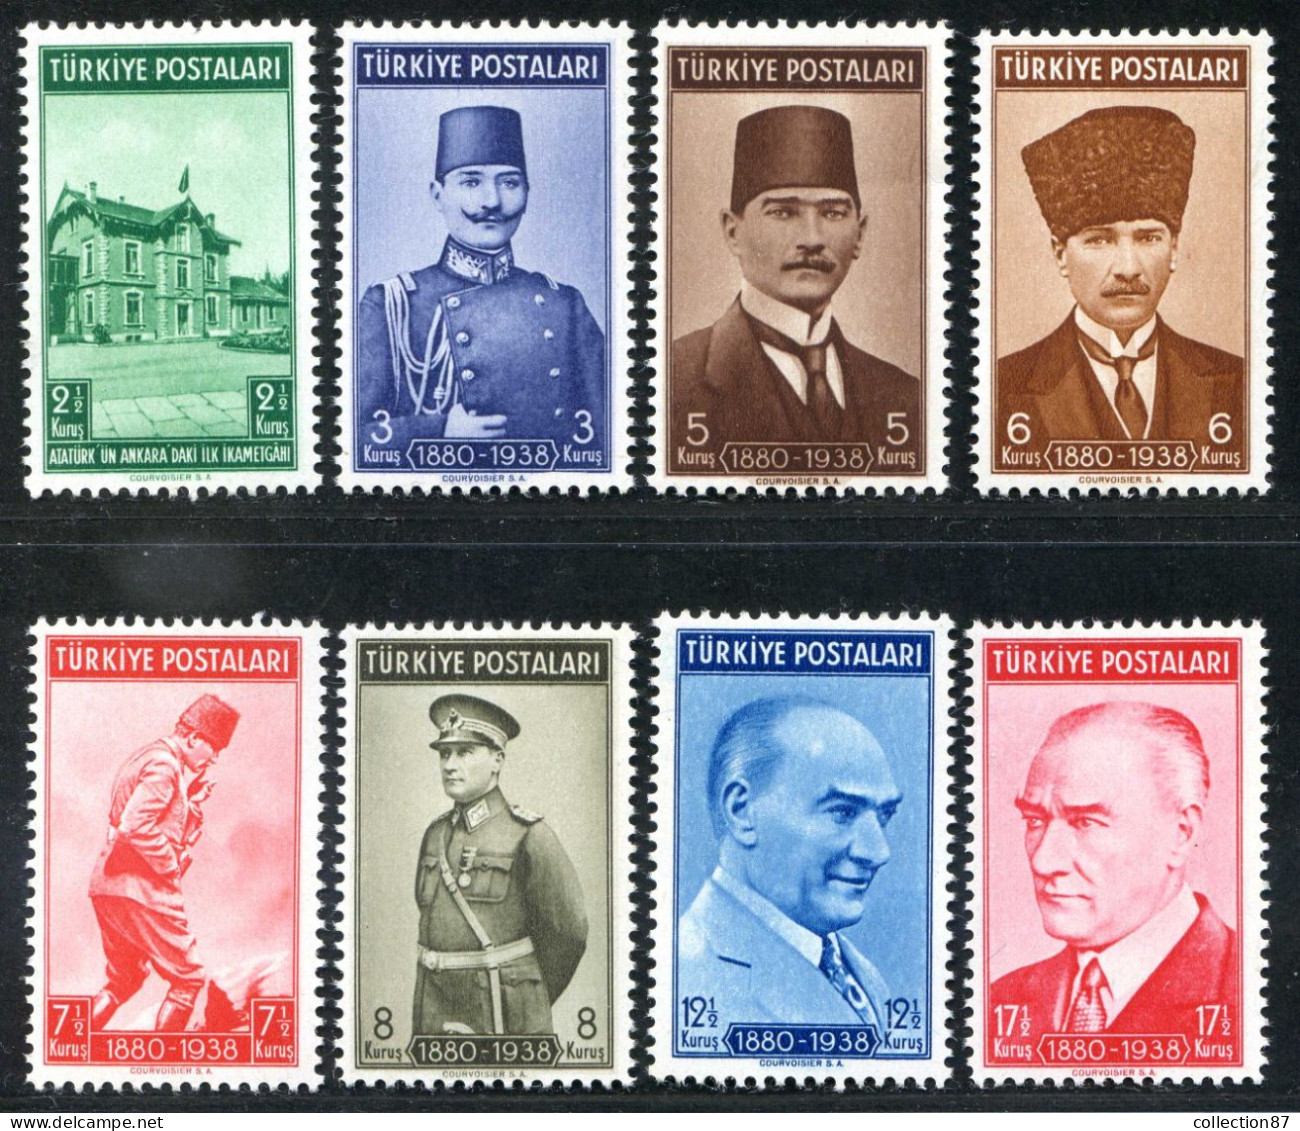 REF 091 > TURQUIE < Yv N° 922 à 929 * * Neuf Luxe Dos Visible MNH * * < Président Ataturk - Neufs